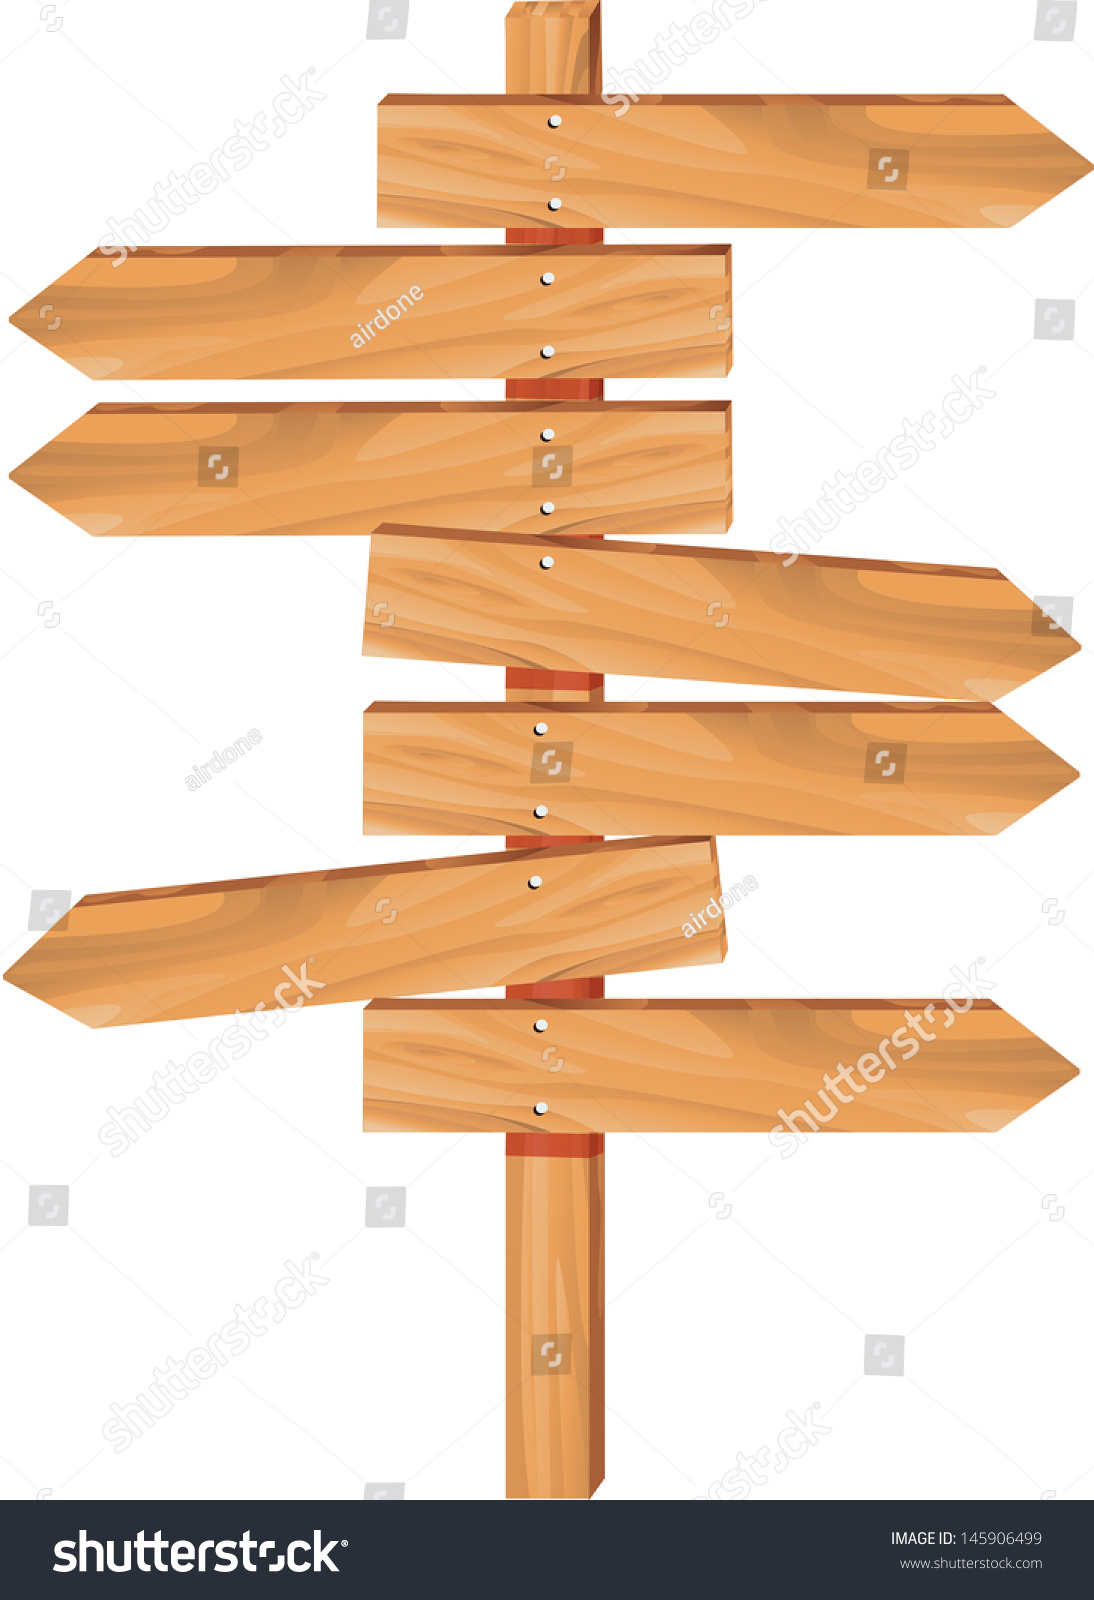 Wooden Arrow Direction Sign Boards Stock Vector 145906499 ...